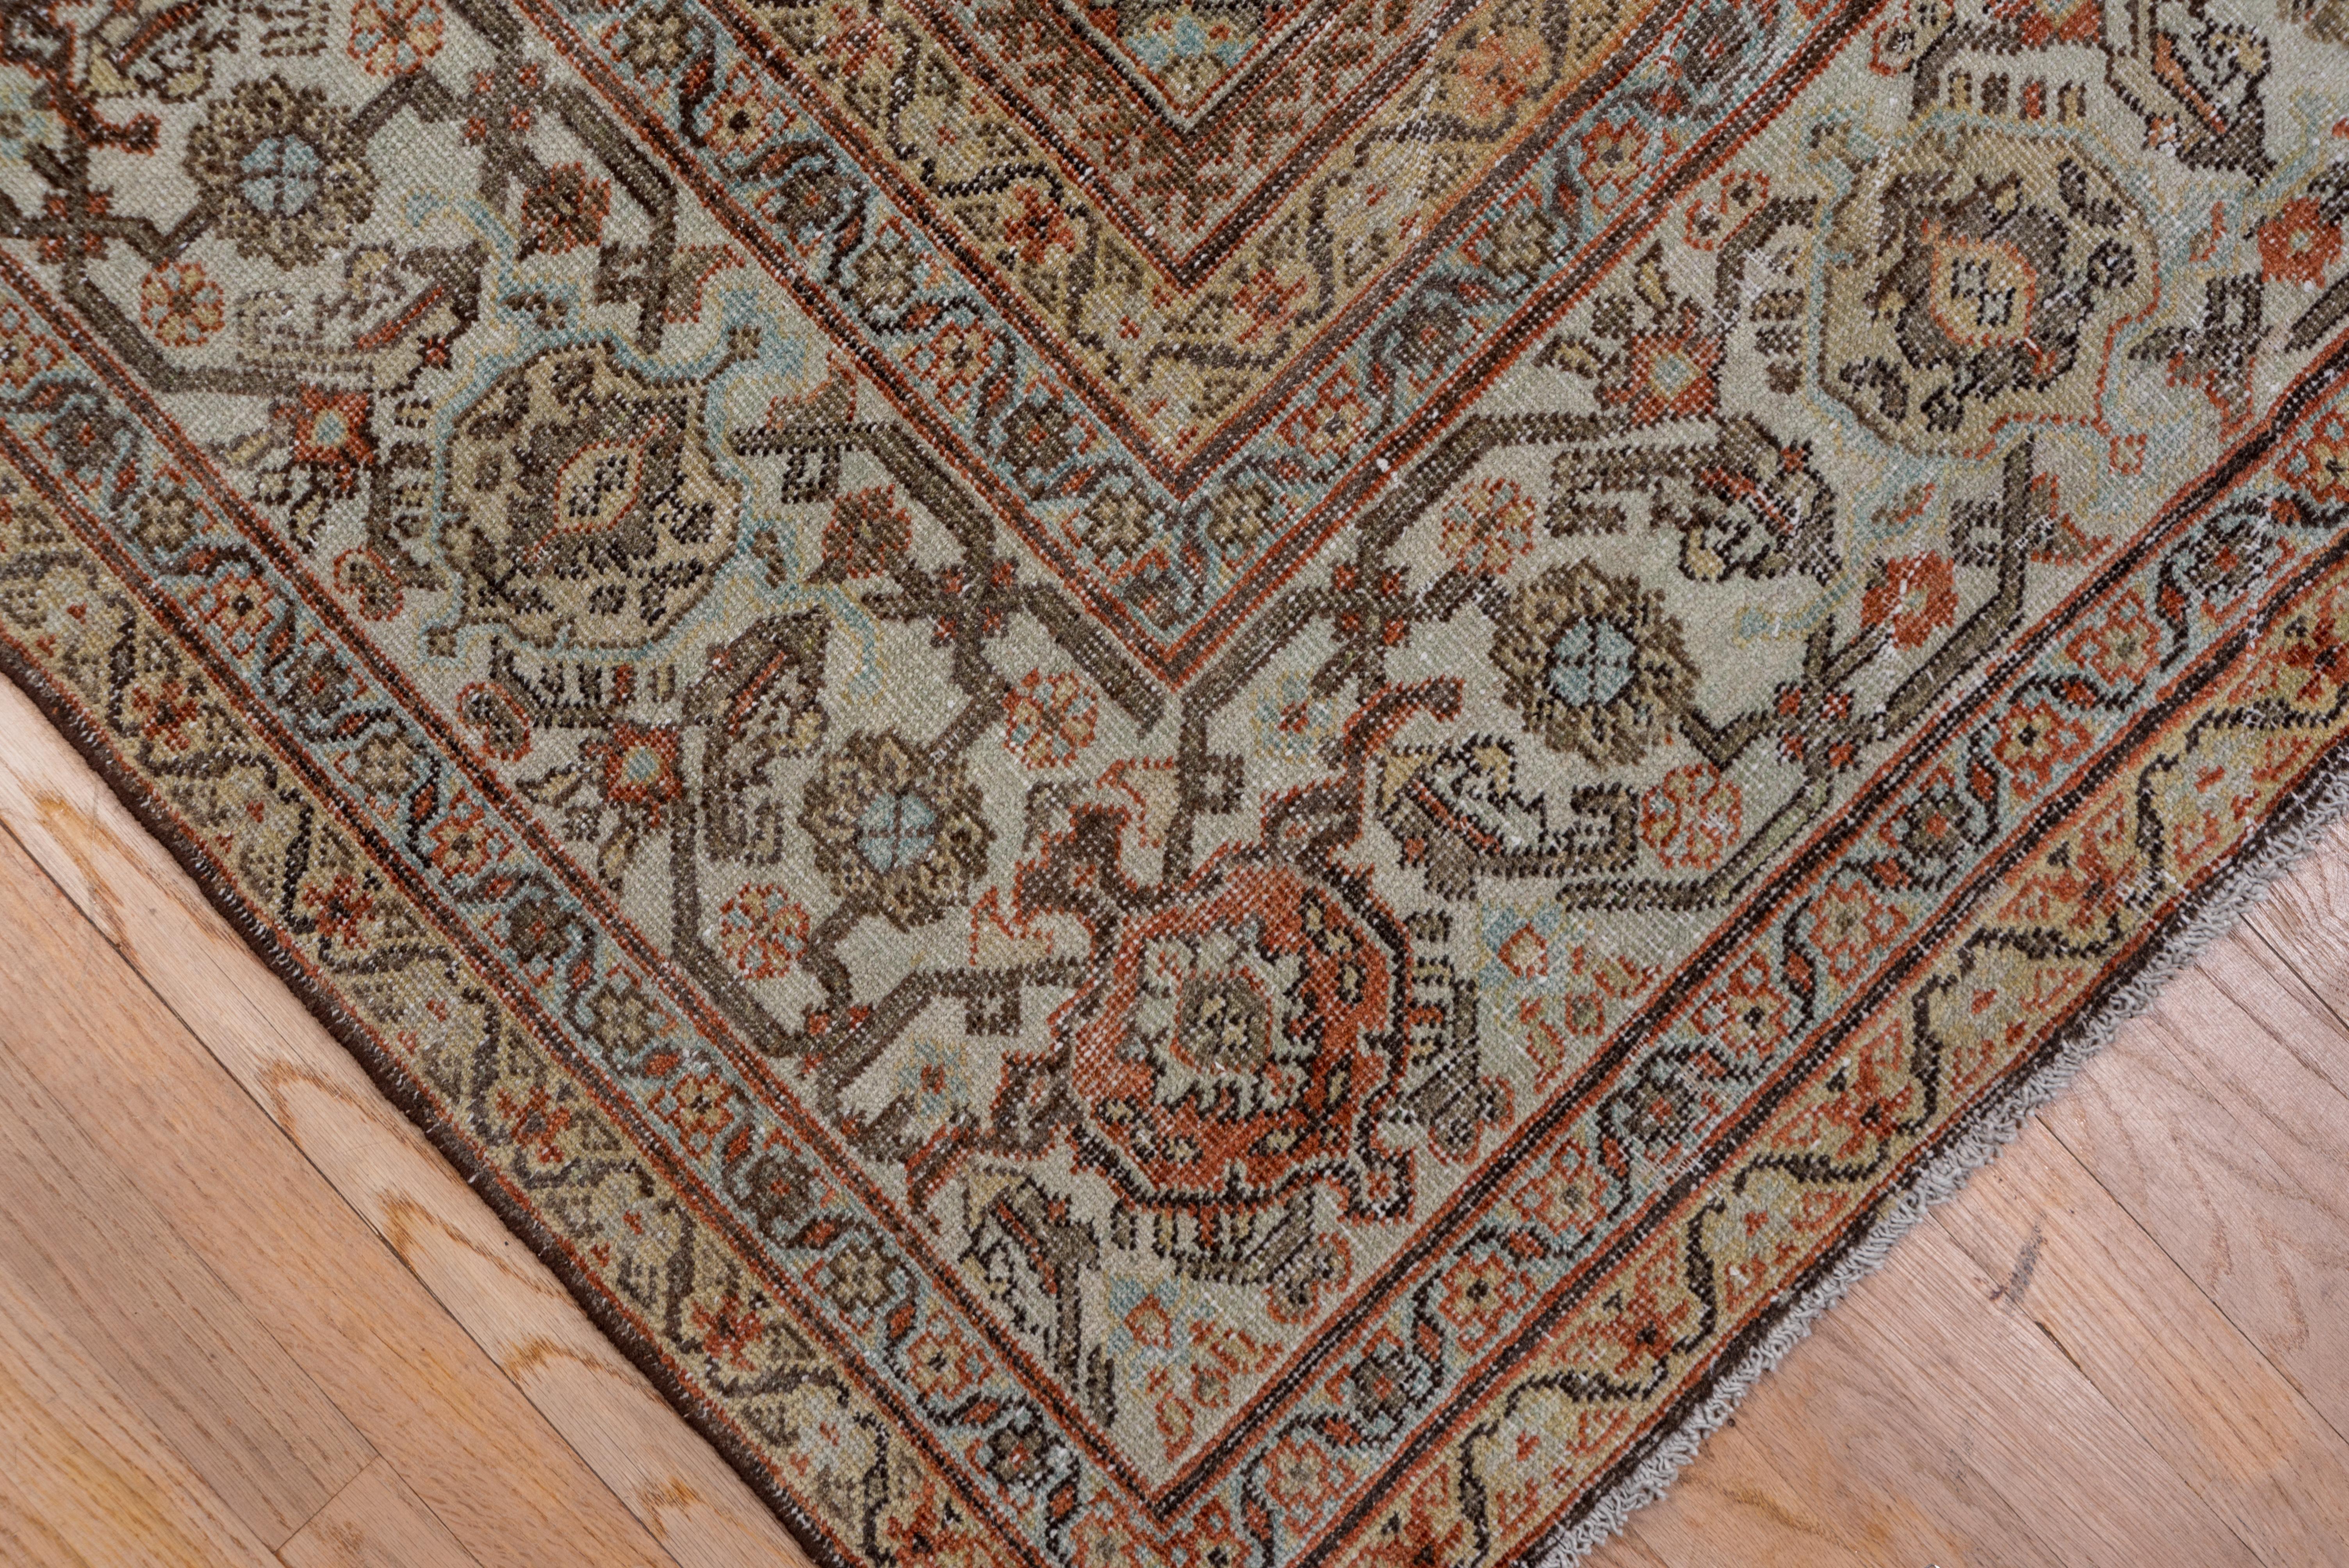 Herati green corners and beige stepped diamond medallion, tomato madder red Gol Hennai allover pattern field. Ivory turtle palmette and lancet leaf border. A totally classic West Persian rural carpet.
  